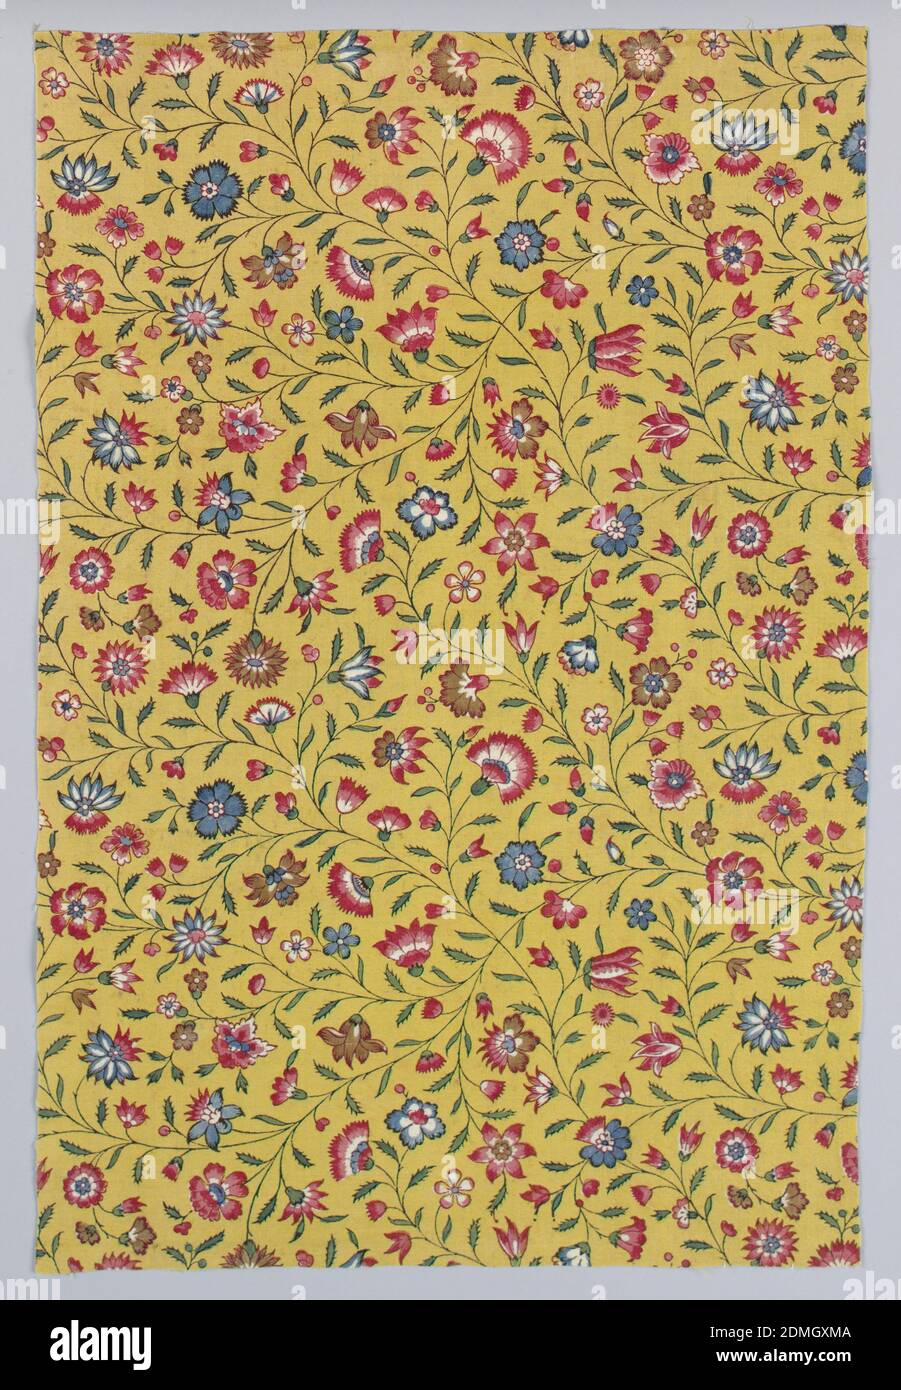 Textile, Medium: cotton Technique: block printed (madder colors and yellow) and painted (blue) on plain weave, Stylized carnations and other flowers in shades of red and blue with thin meandering stems on a bright yellow ground., France, ca. 1800, printed, dyed & painted textiles, Textile Stock Photo